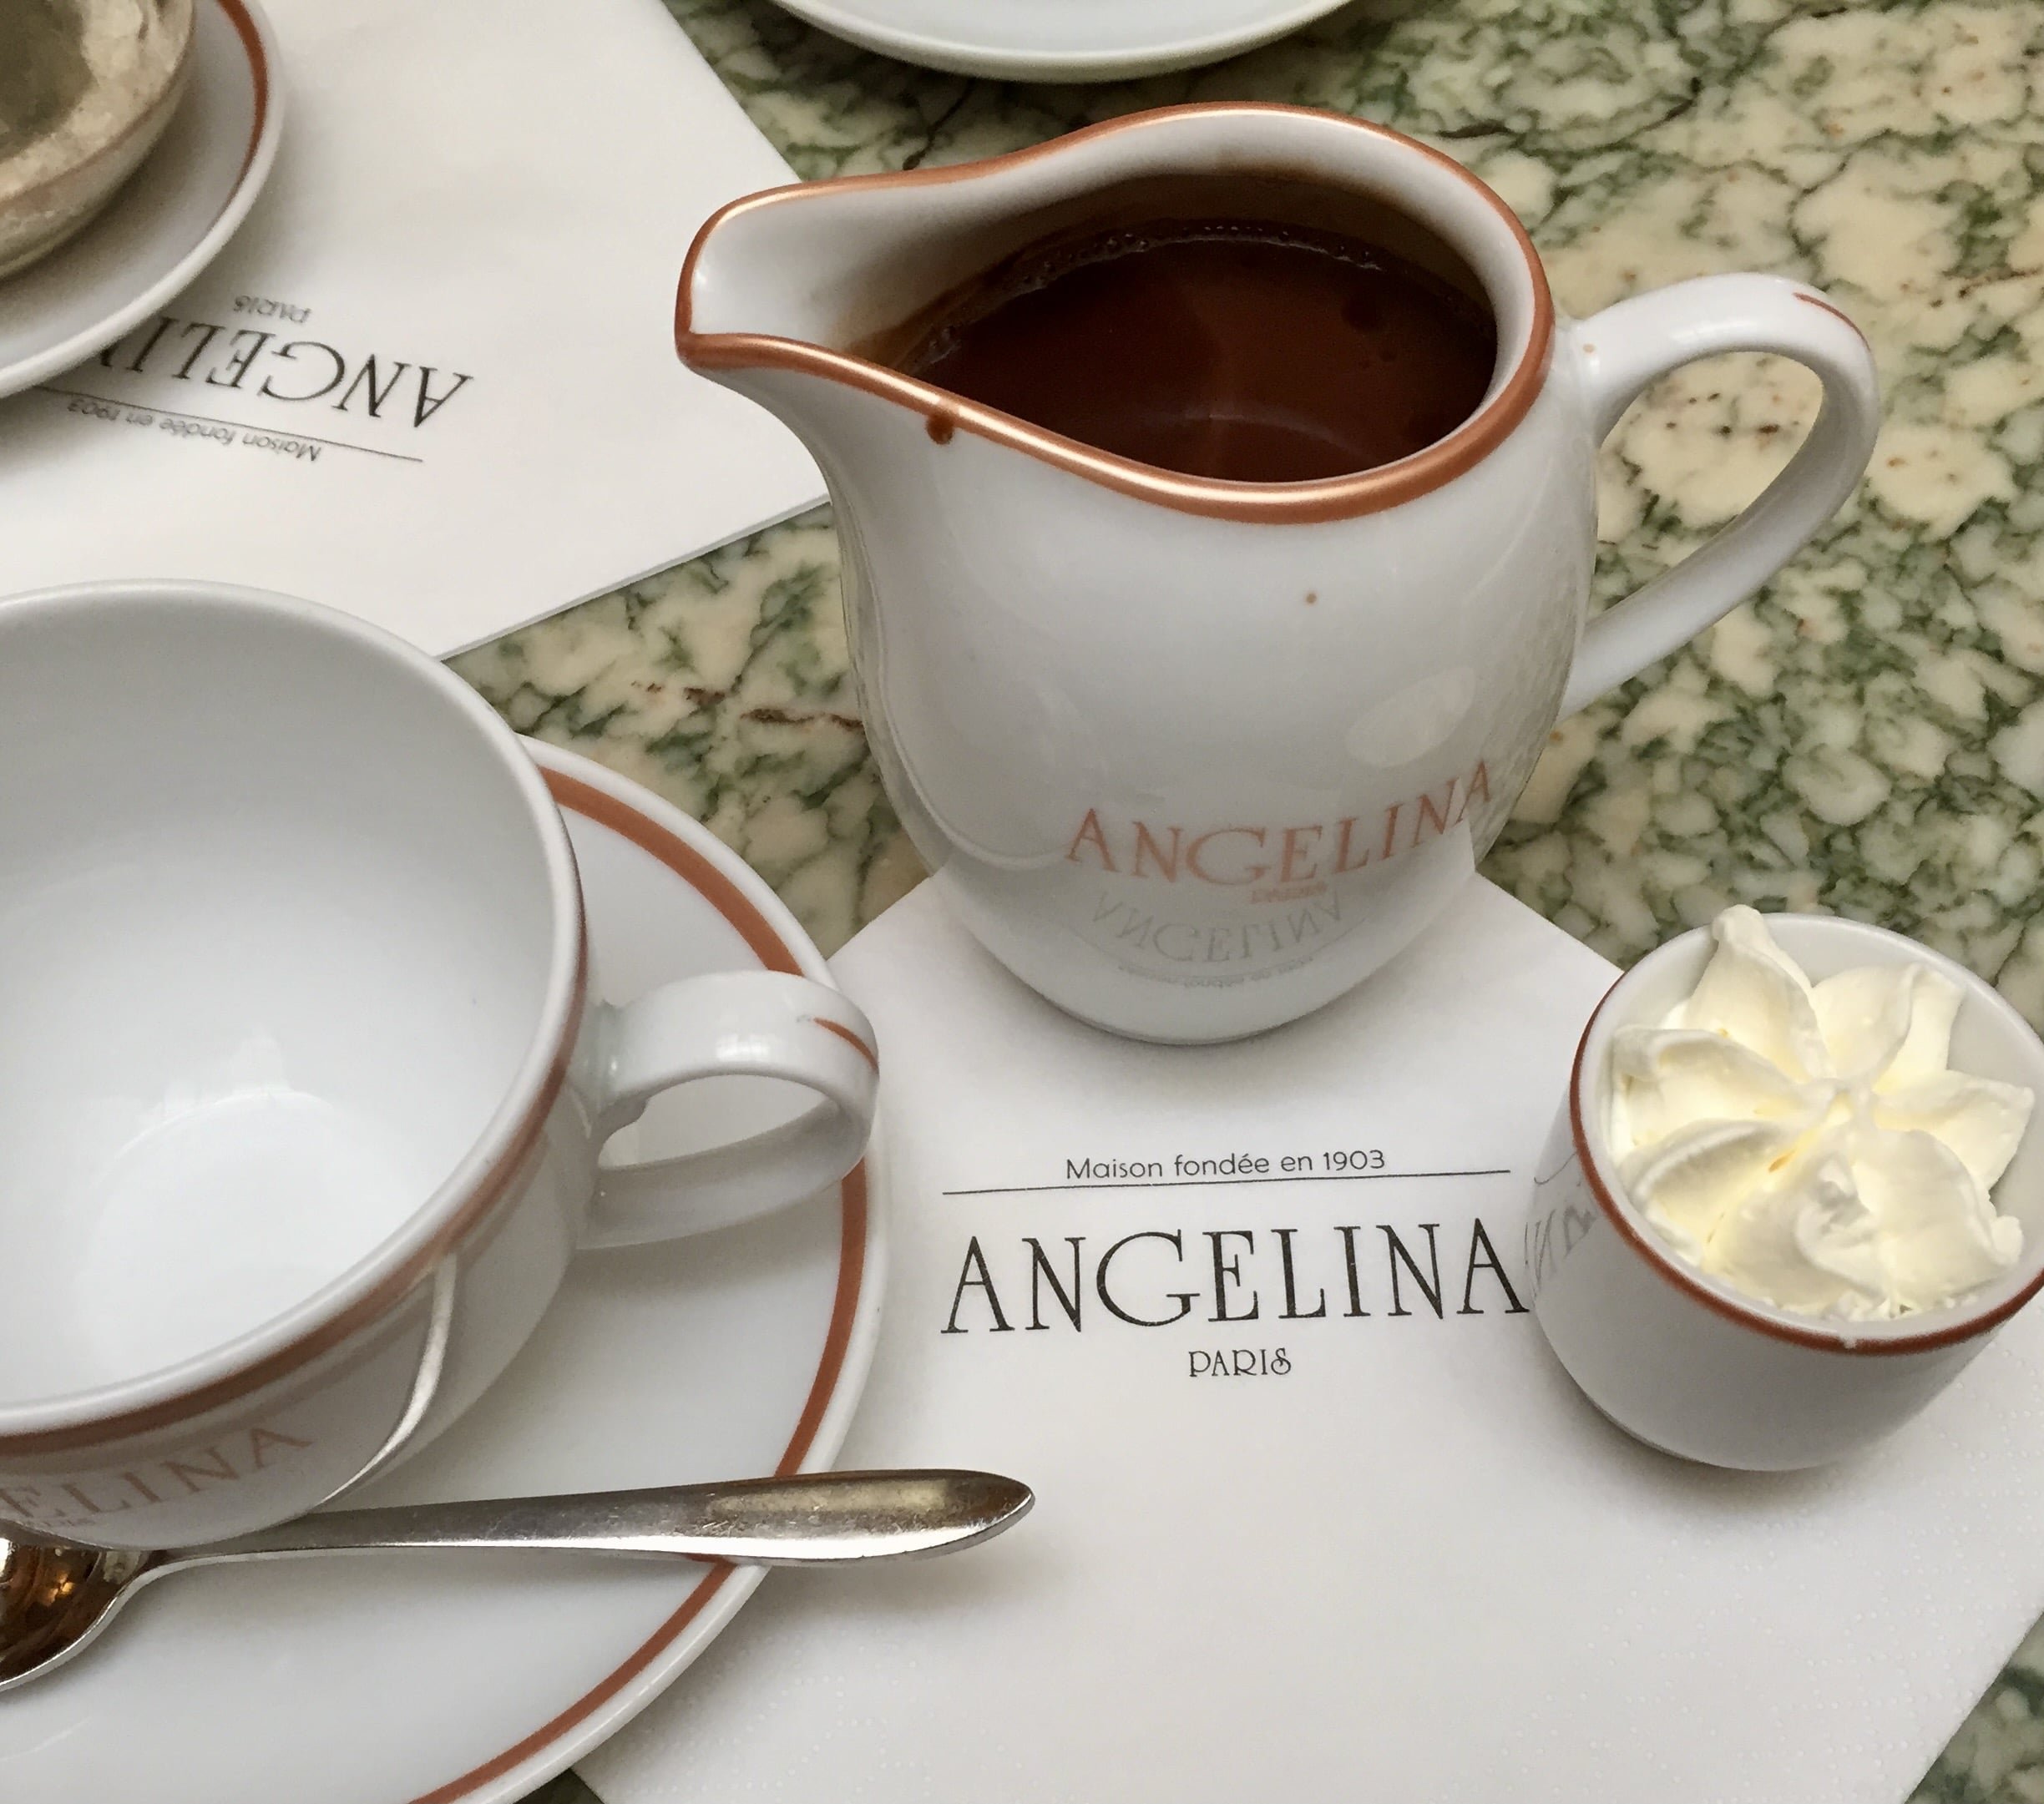 For me, the best chocolate in Paris is Angelina’s hot chocolate!